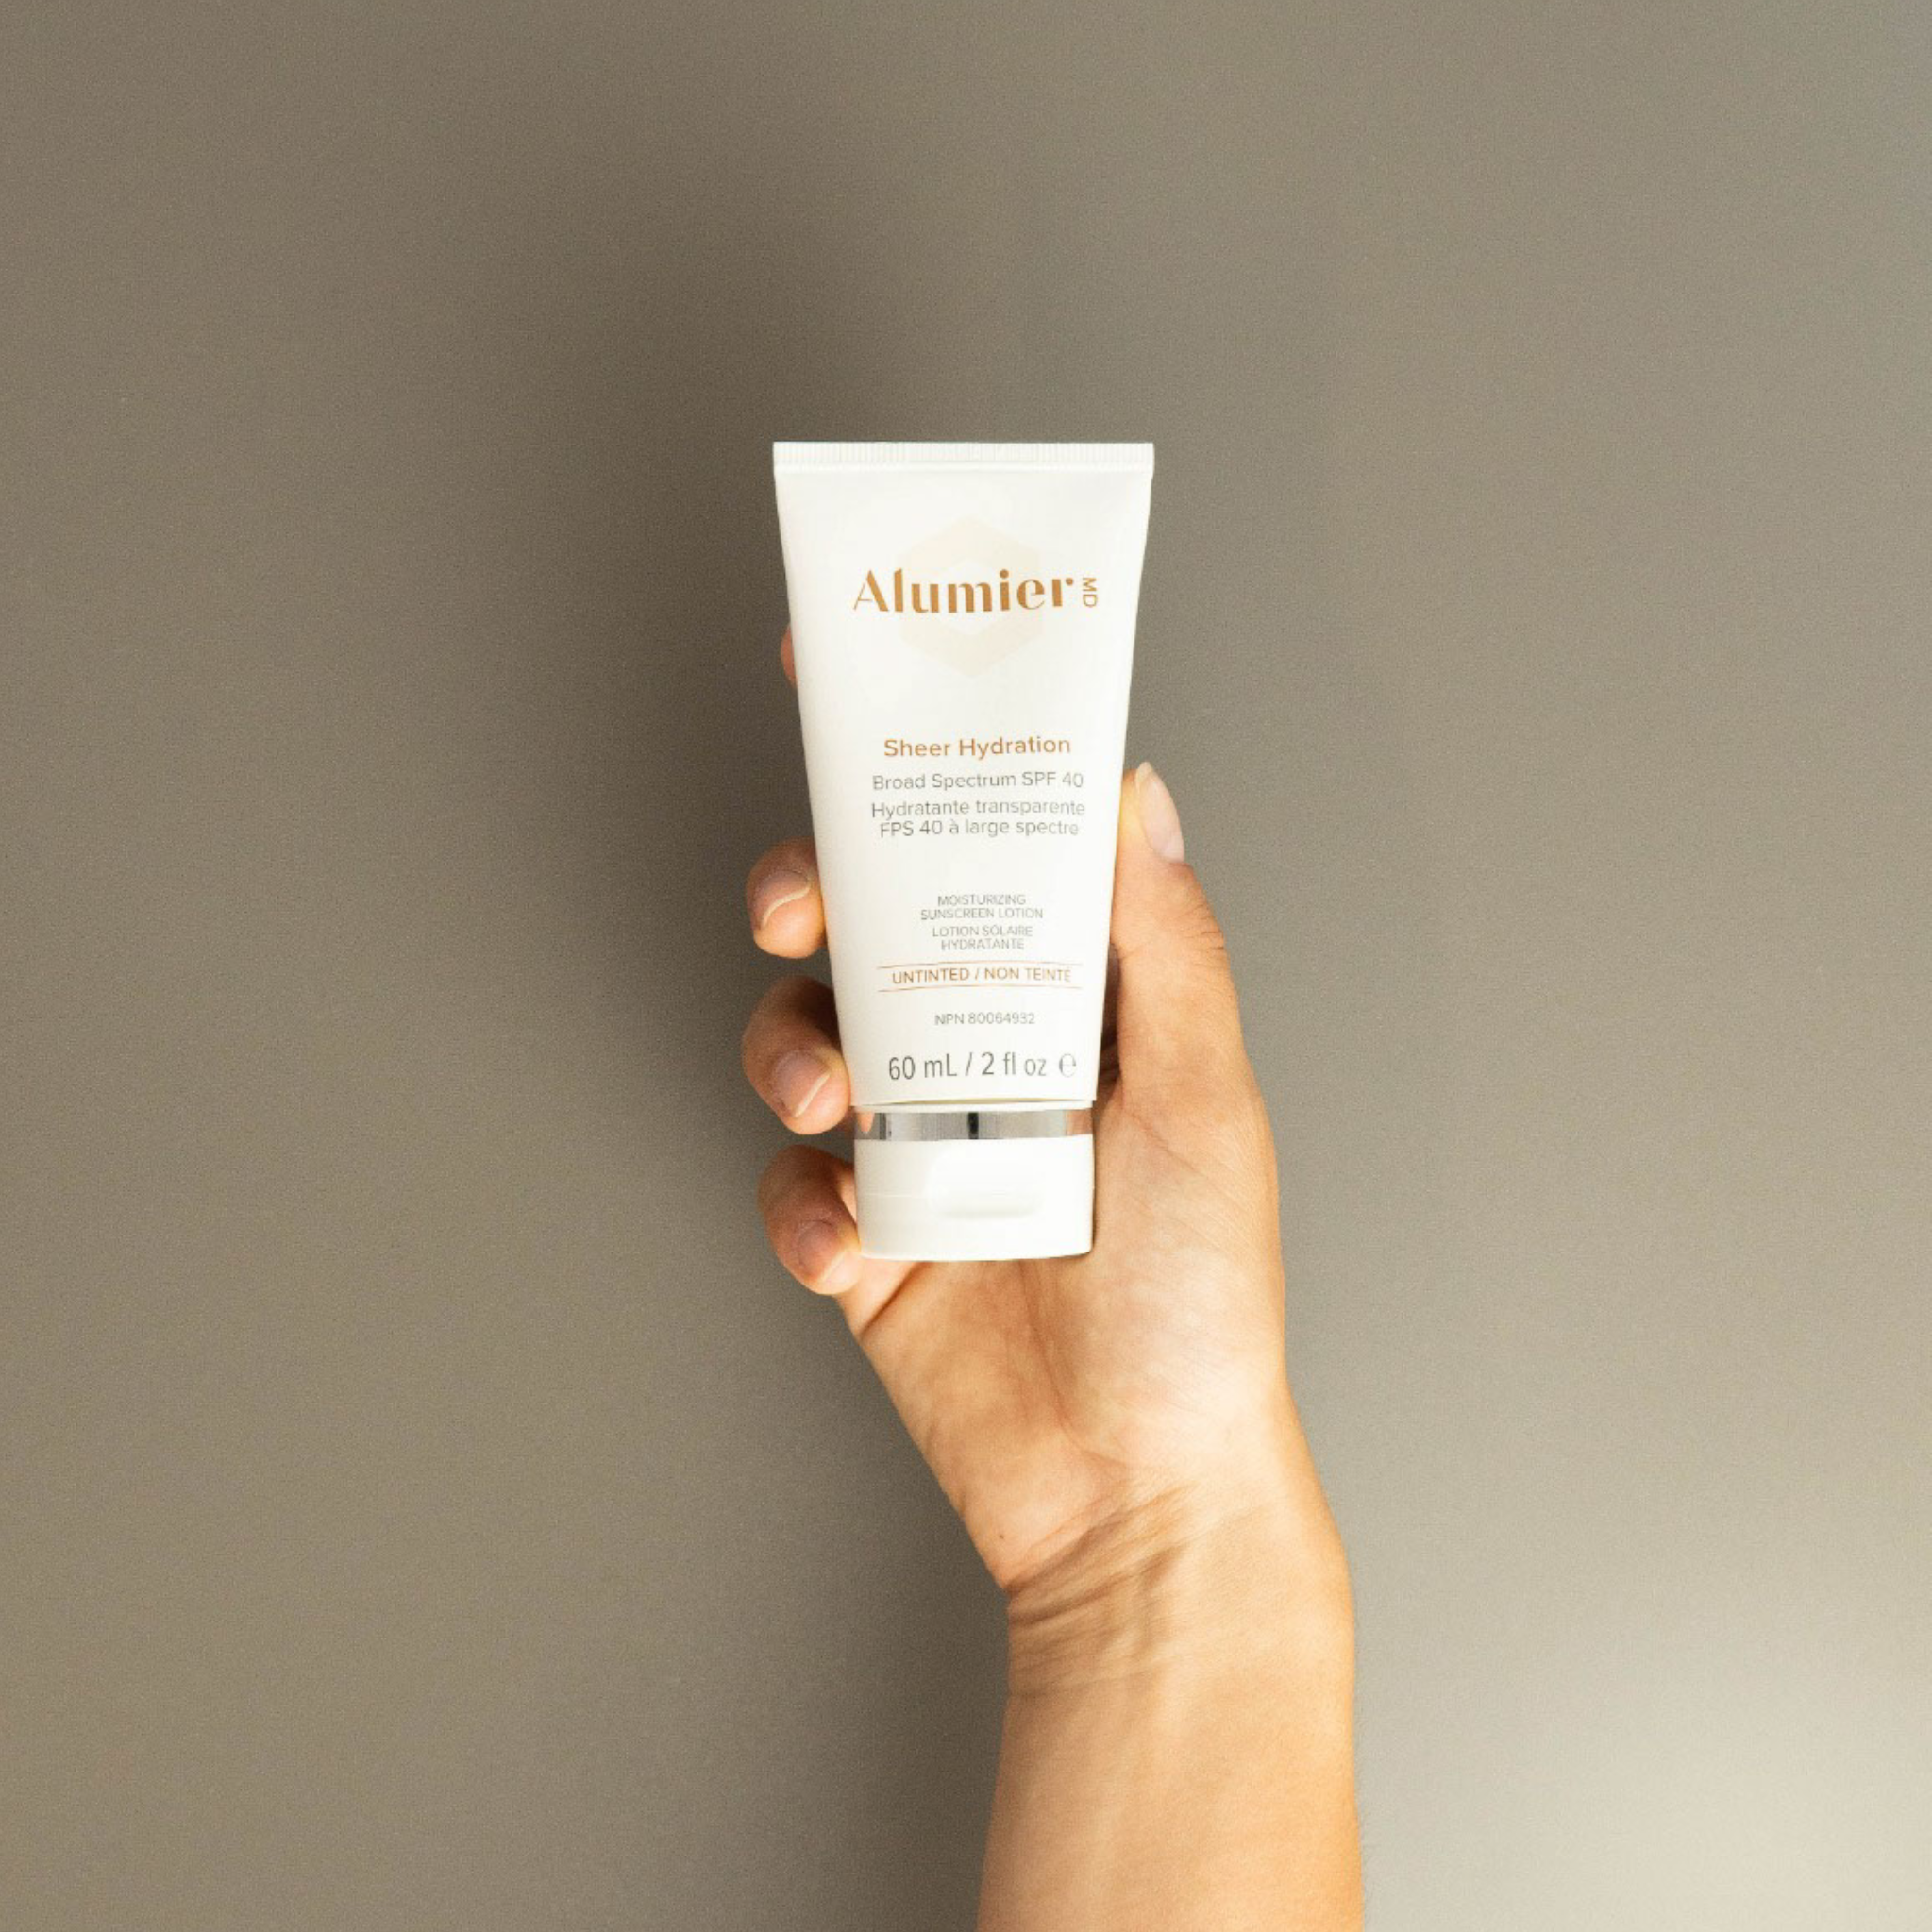 Alumier MD | Sheer Hydration Broad Spectrum SPF 40 Untinted (60ml)